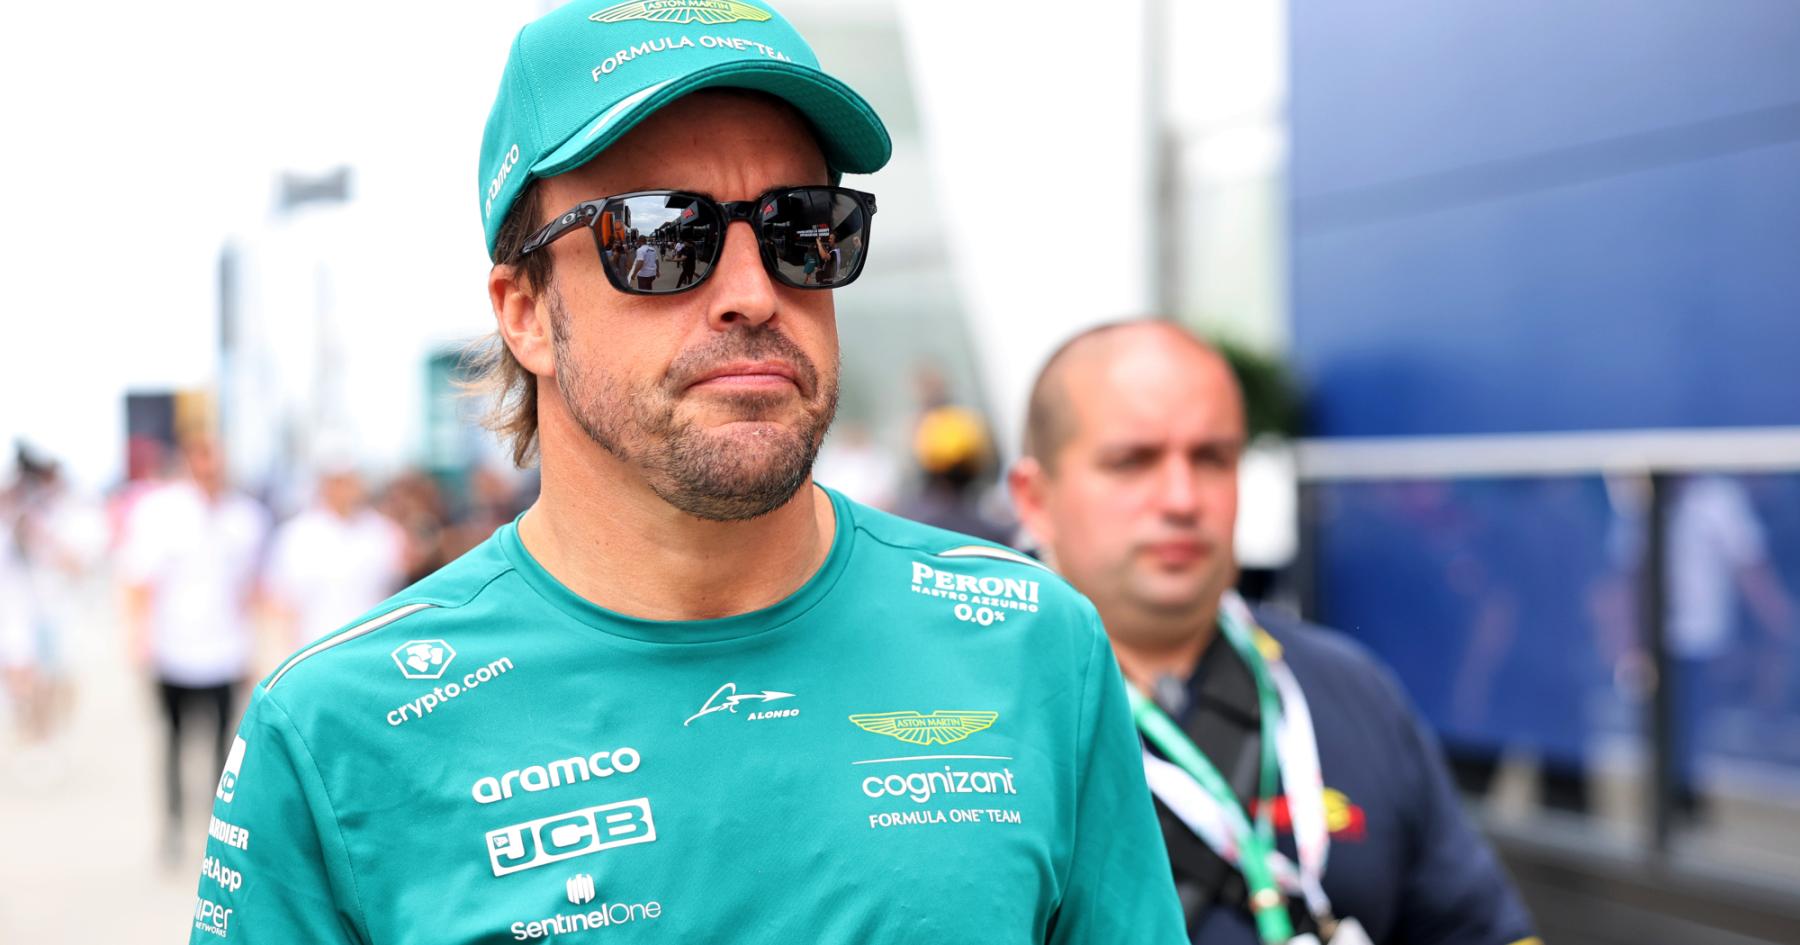 Alonso Makes Strong Statement about Unfair Testing Conditions